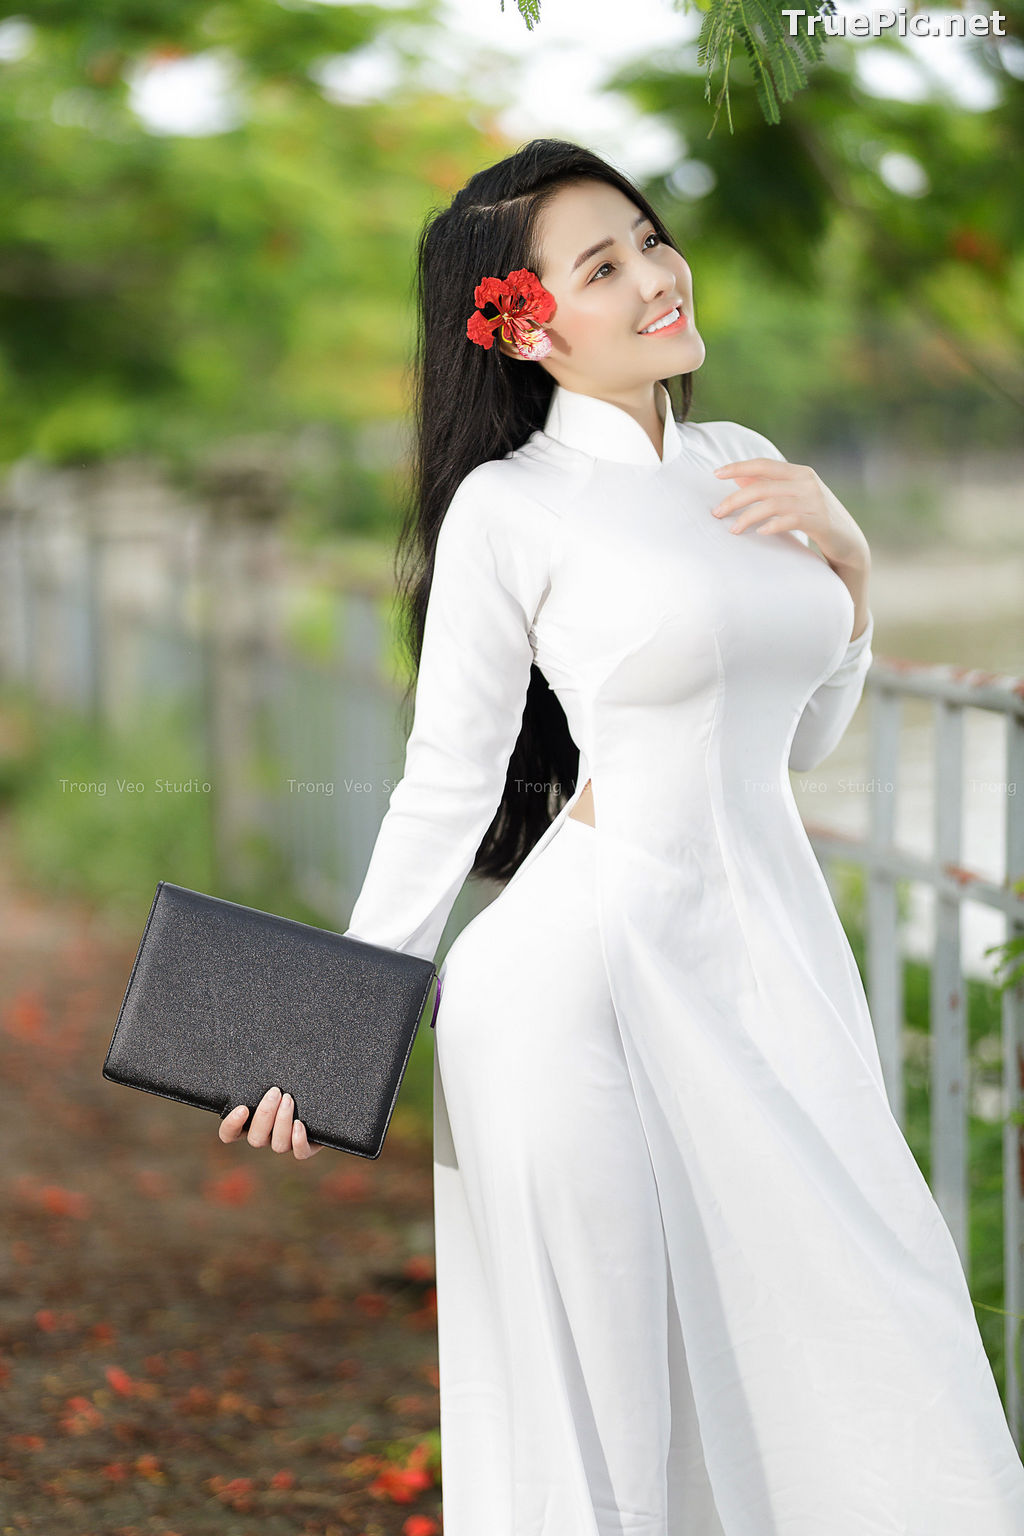 Image The Beauty of Vietnamese Girls with Traditional Dress (Ao Dai) #1 - TruePic.net - Picture-67